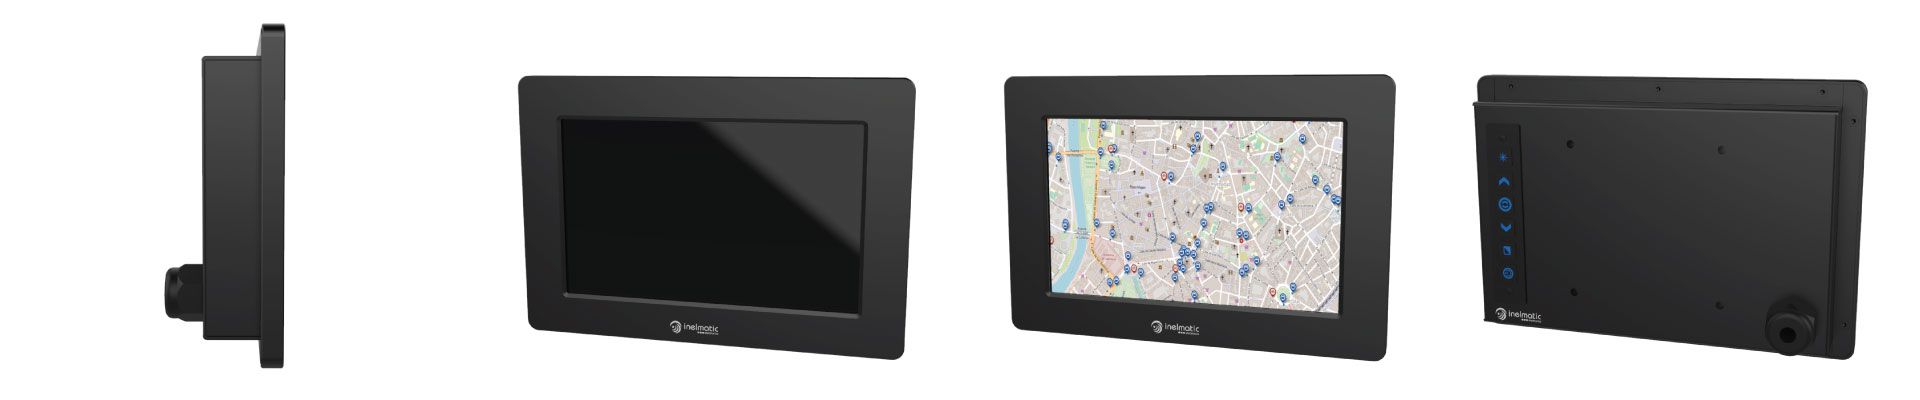 7 inches rugged display - Inelmatic